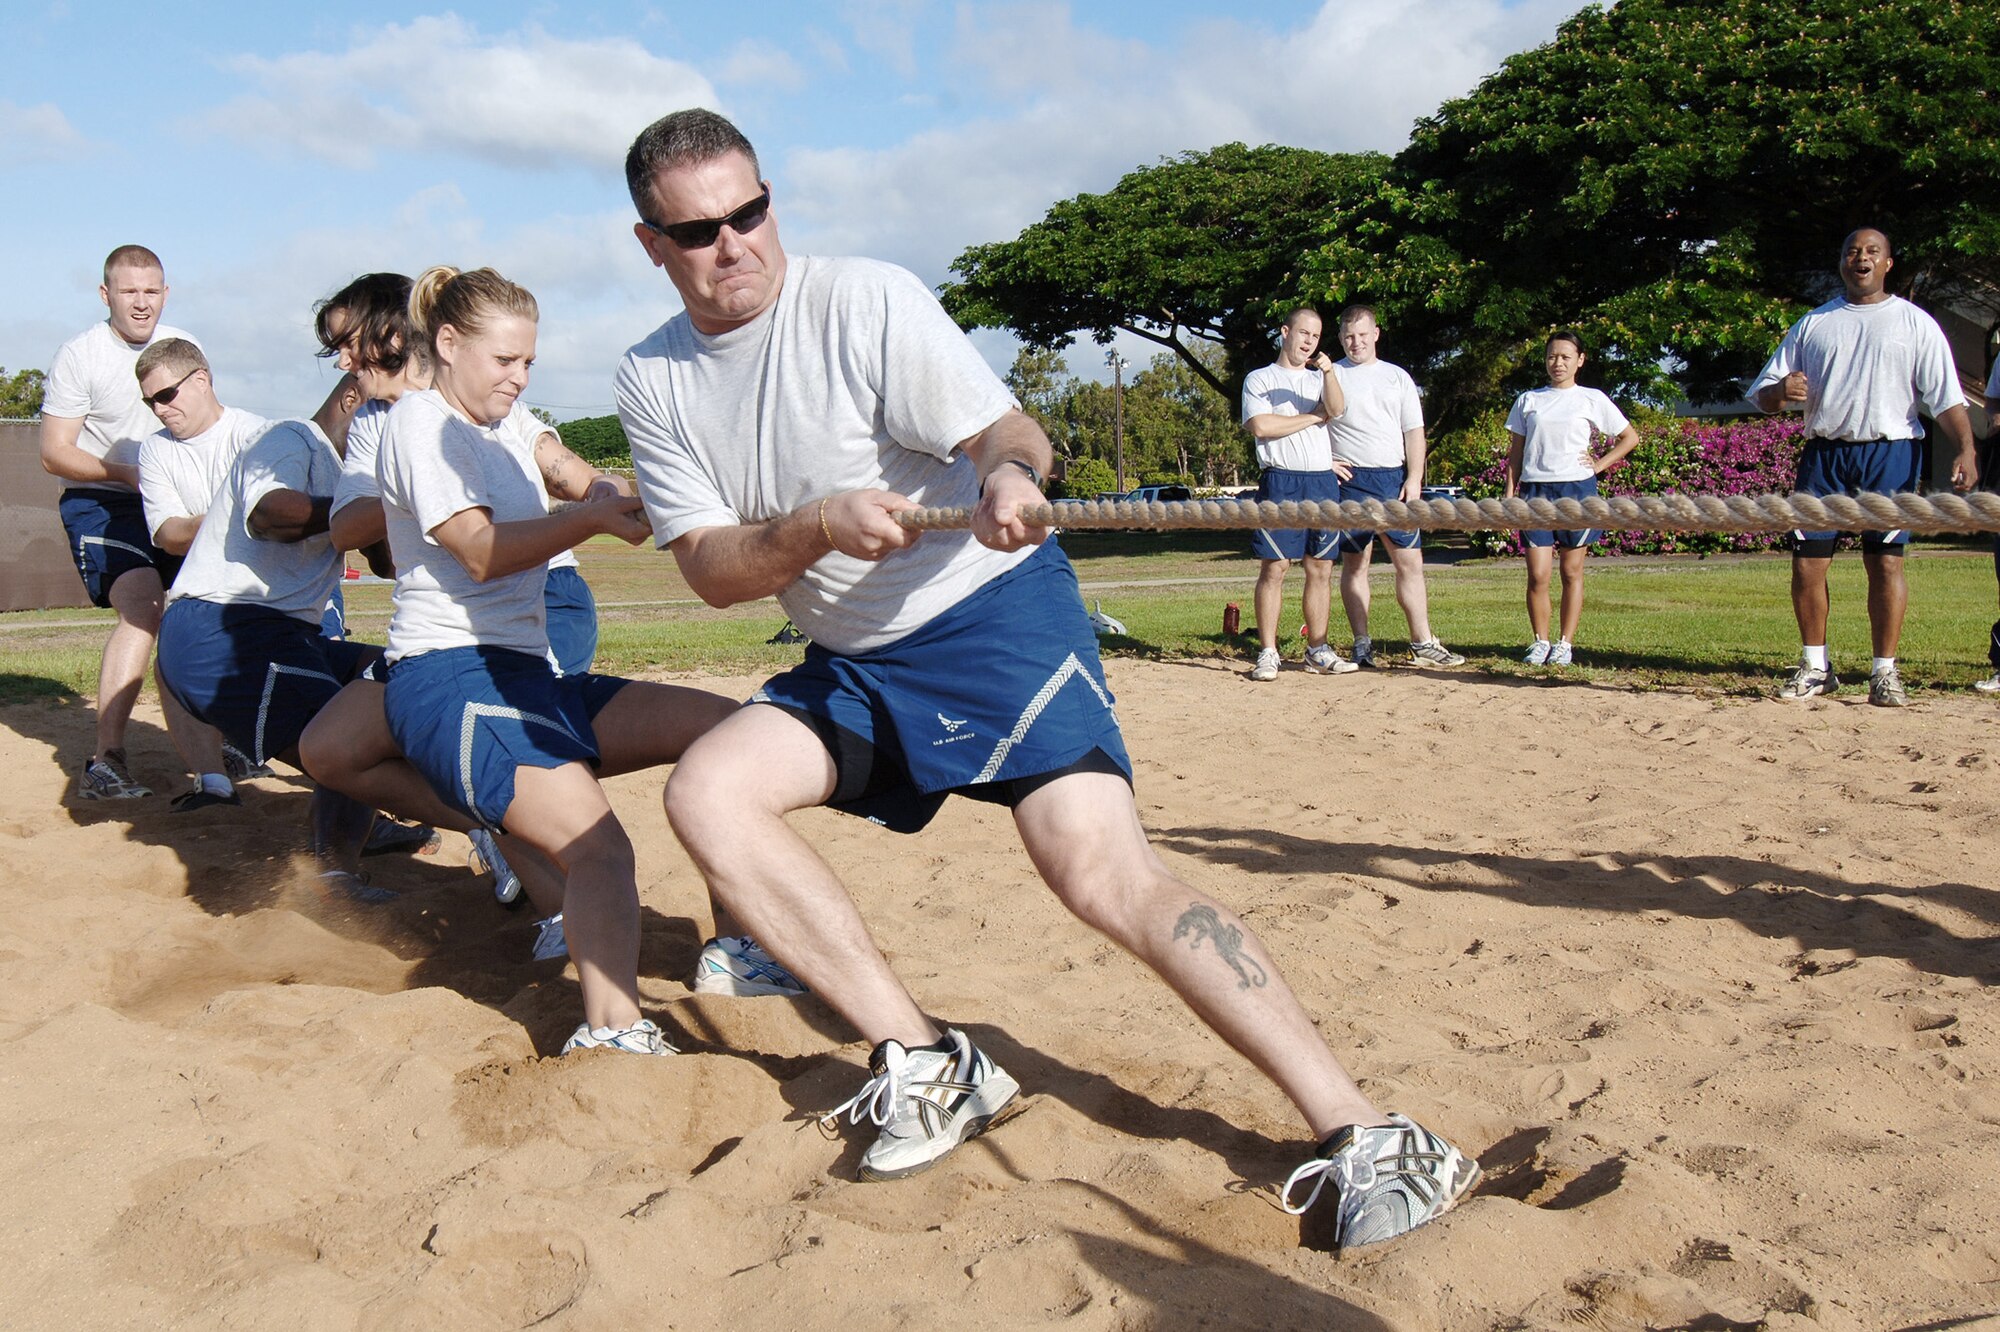 Members of 13th Air Force compete in a tug-of-war battle during a Jungle Day sporting event held Nov.13, 2009, at Hickam Air Force Base, Hawaii. Jungle Day is a tradition that originated when the organization was assigned to Andersen AFB, Guam, and gives 13th Air Force members a chance to have fun and give back to the local community. (U.S. Air Force photo/Vanessa M. Forloine)